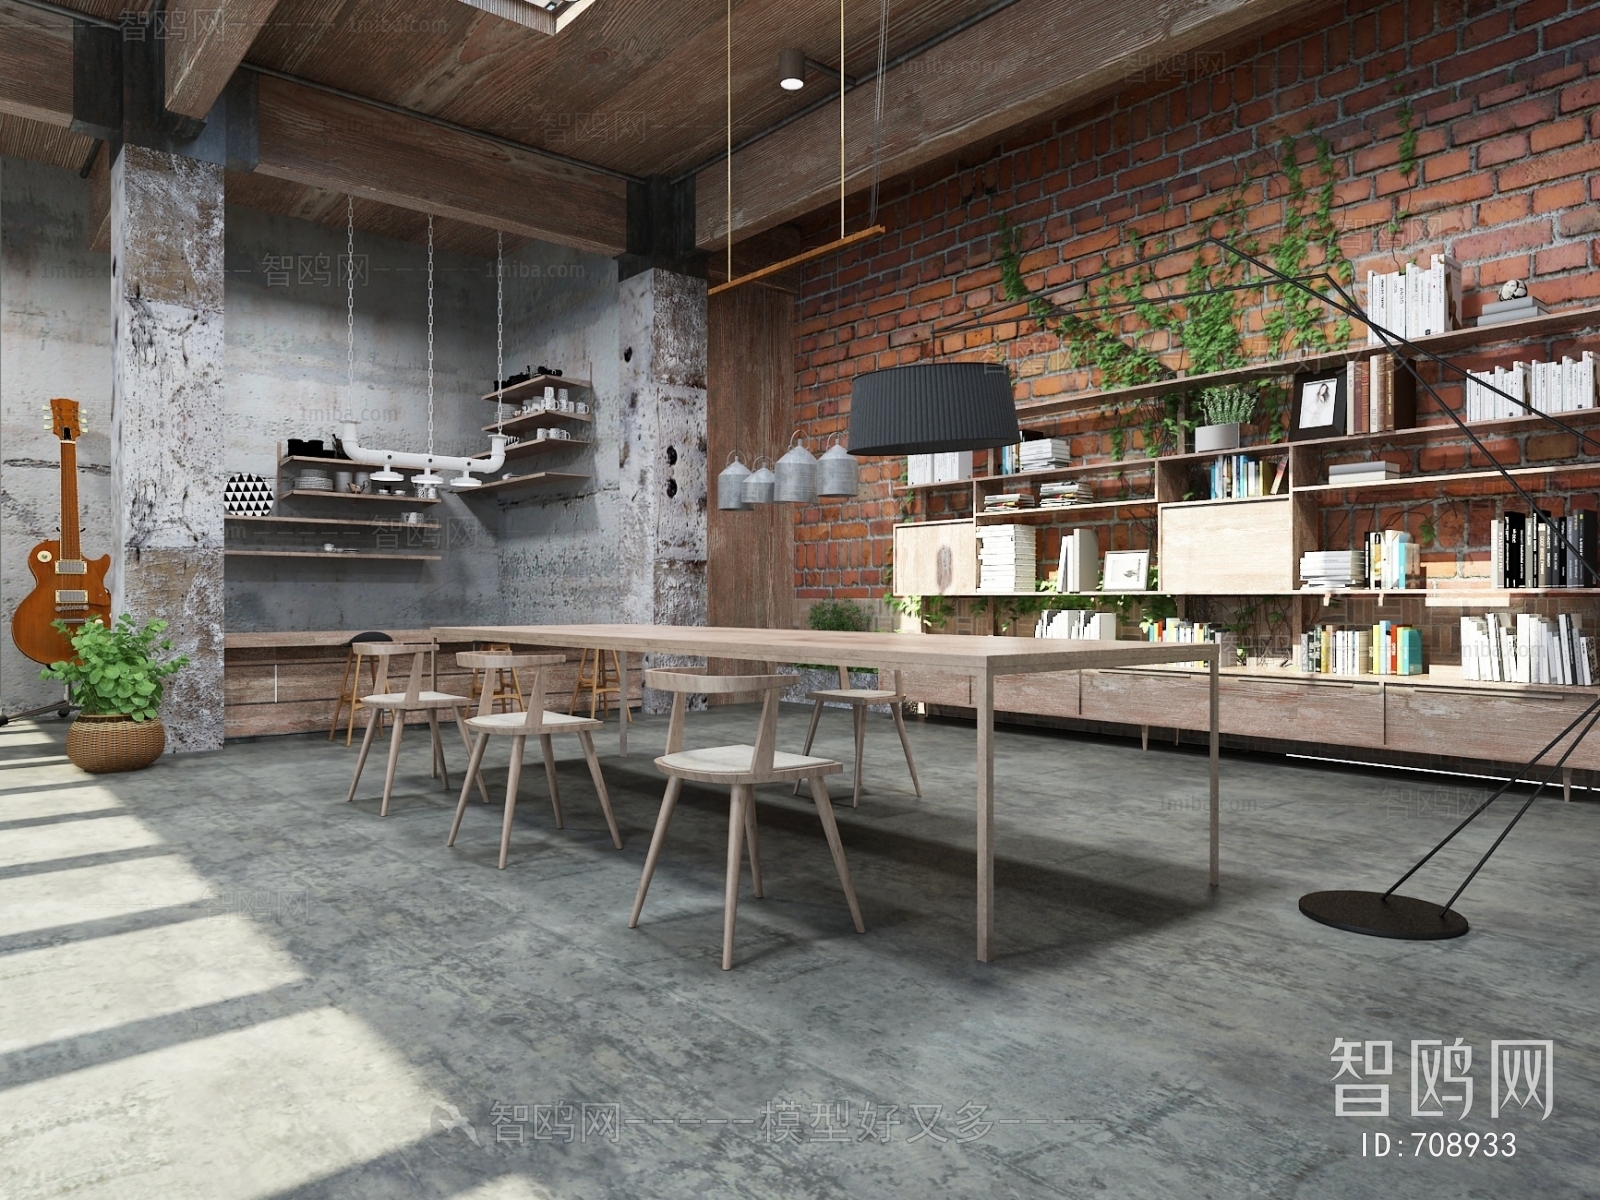 Industrial Style Dining Room